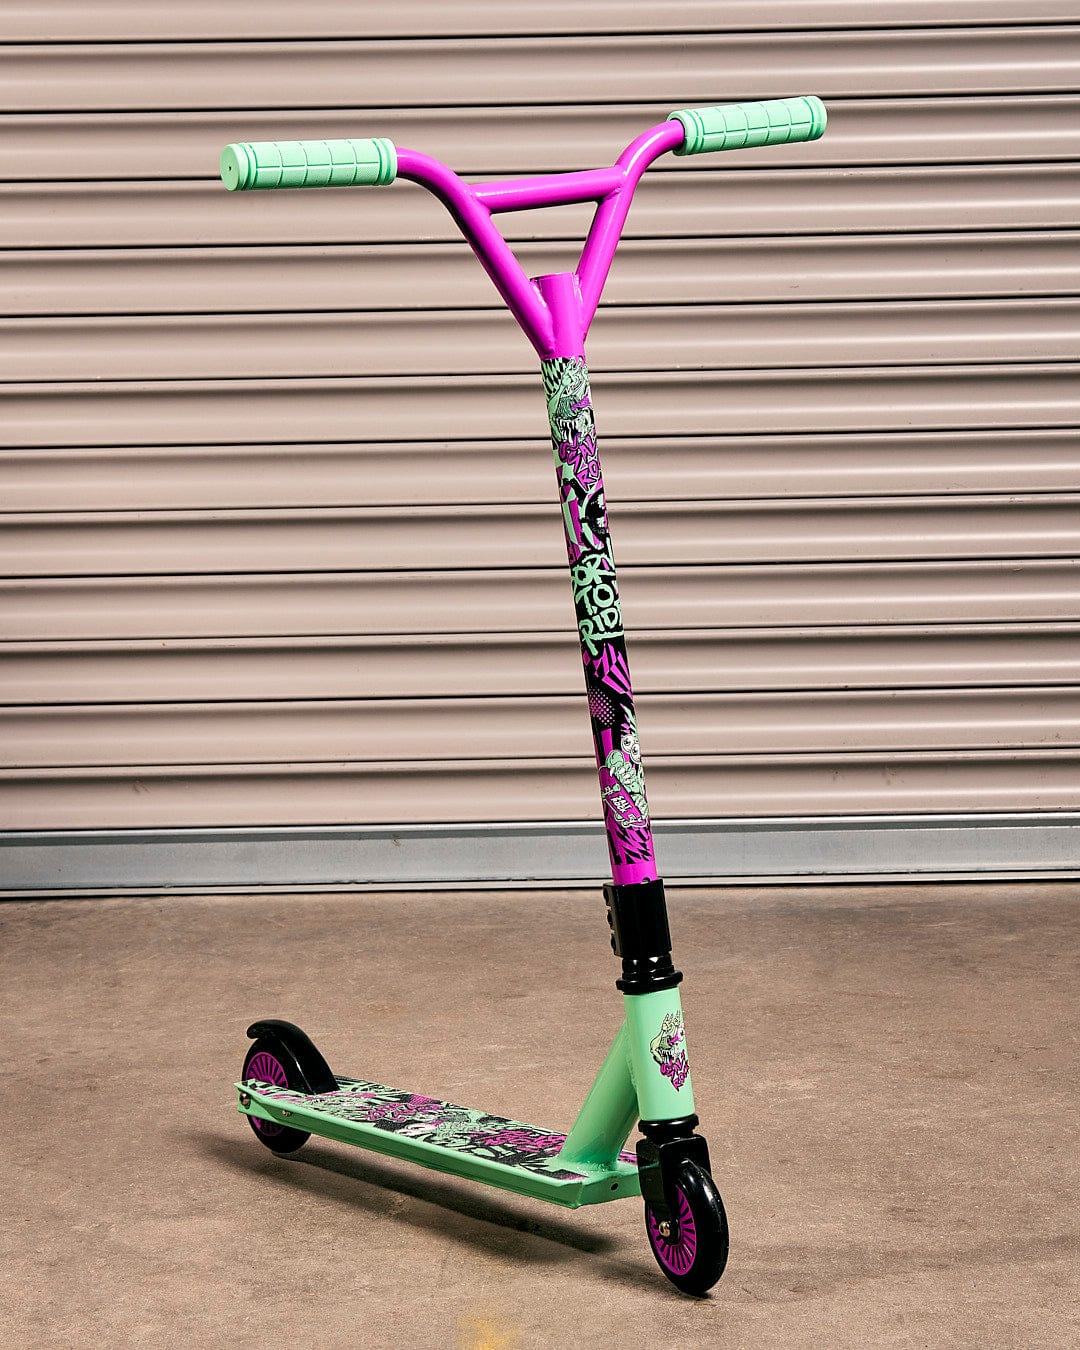 A Creeper Stunt Scooter - Turquoise by Saltrock with a pink handlebar.